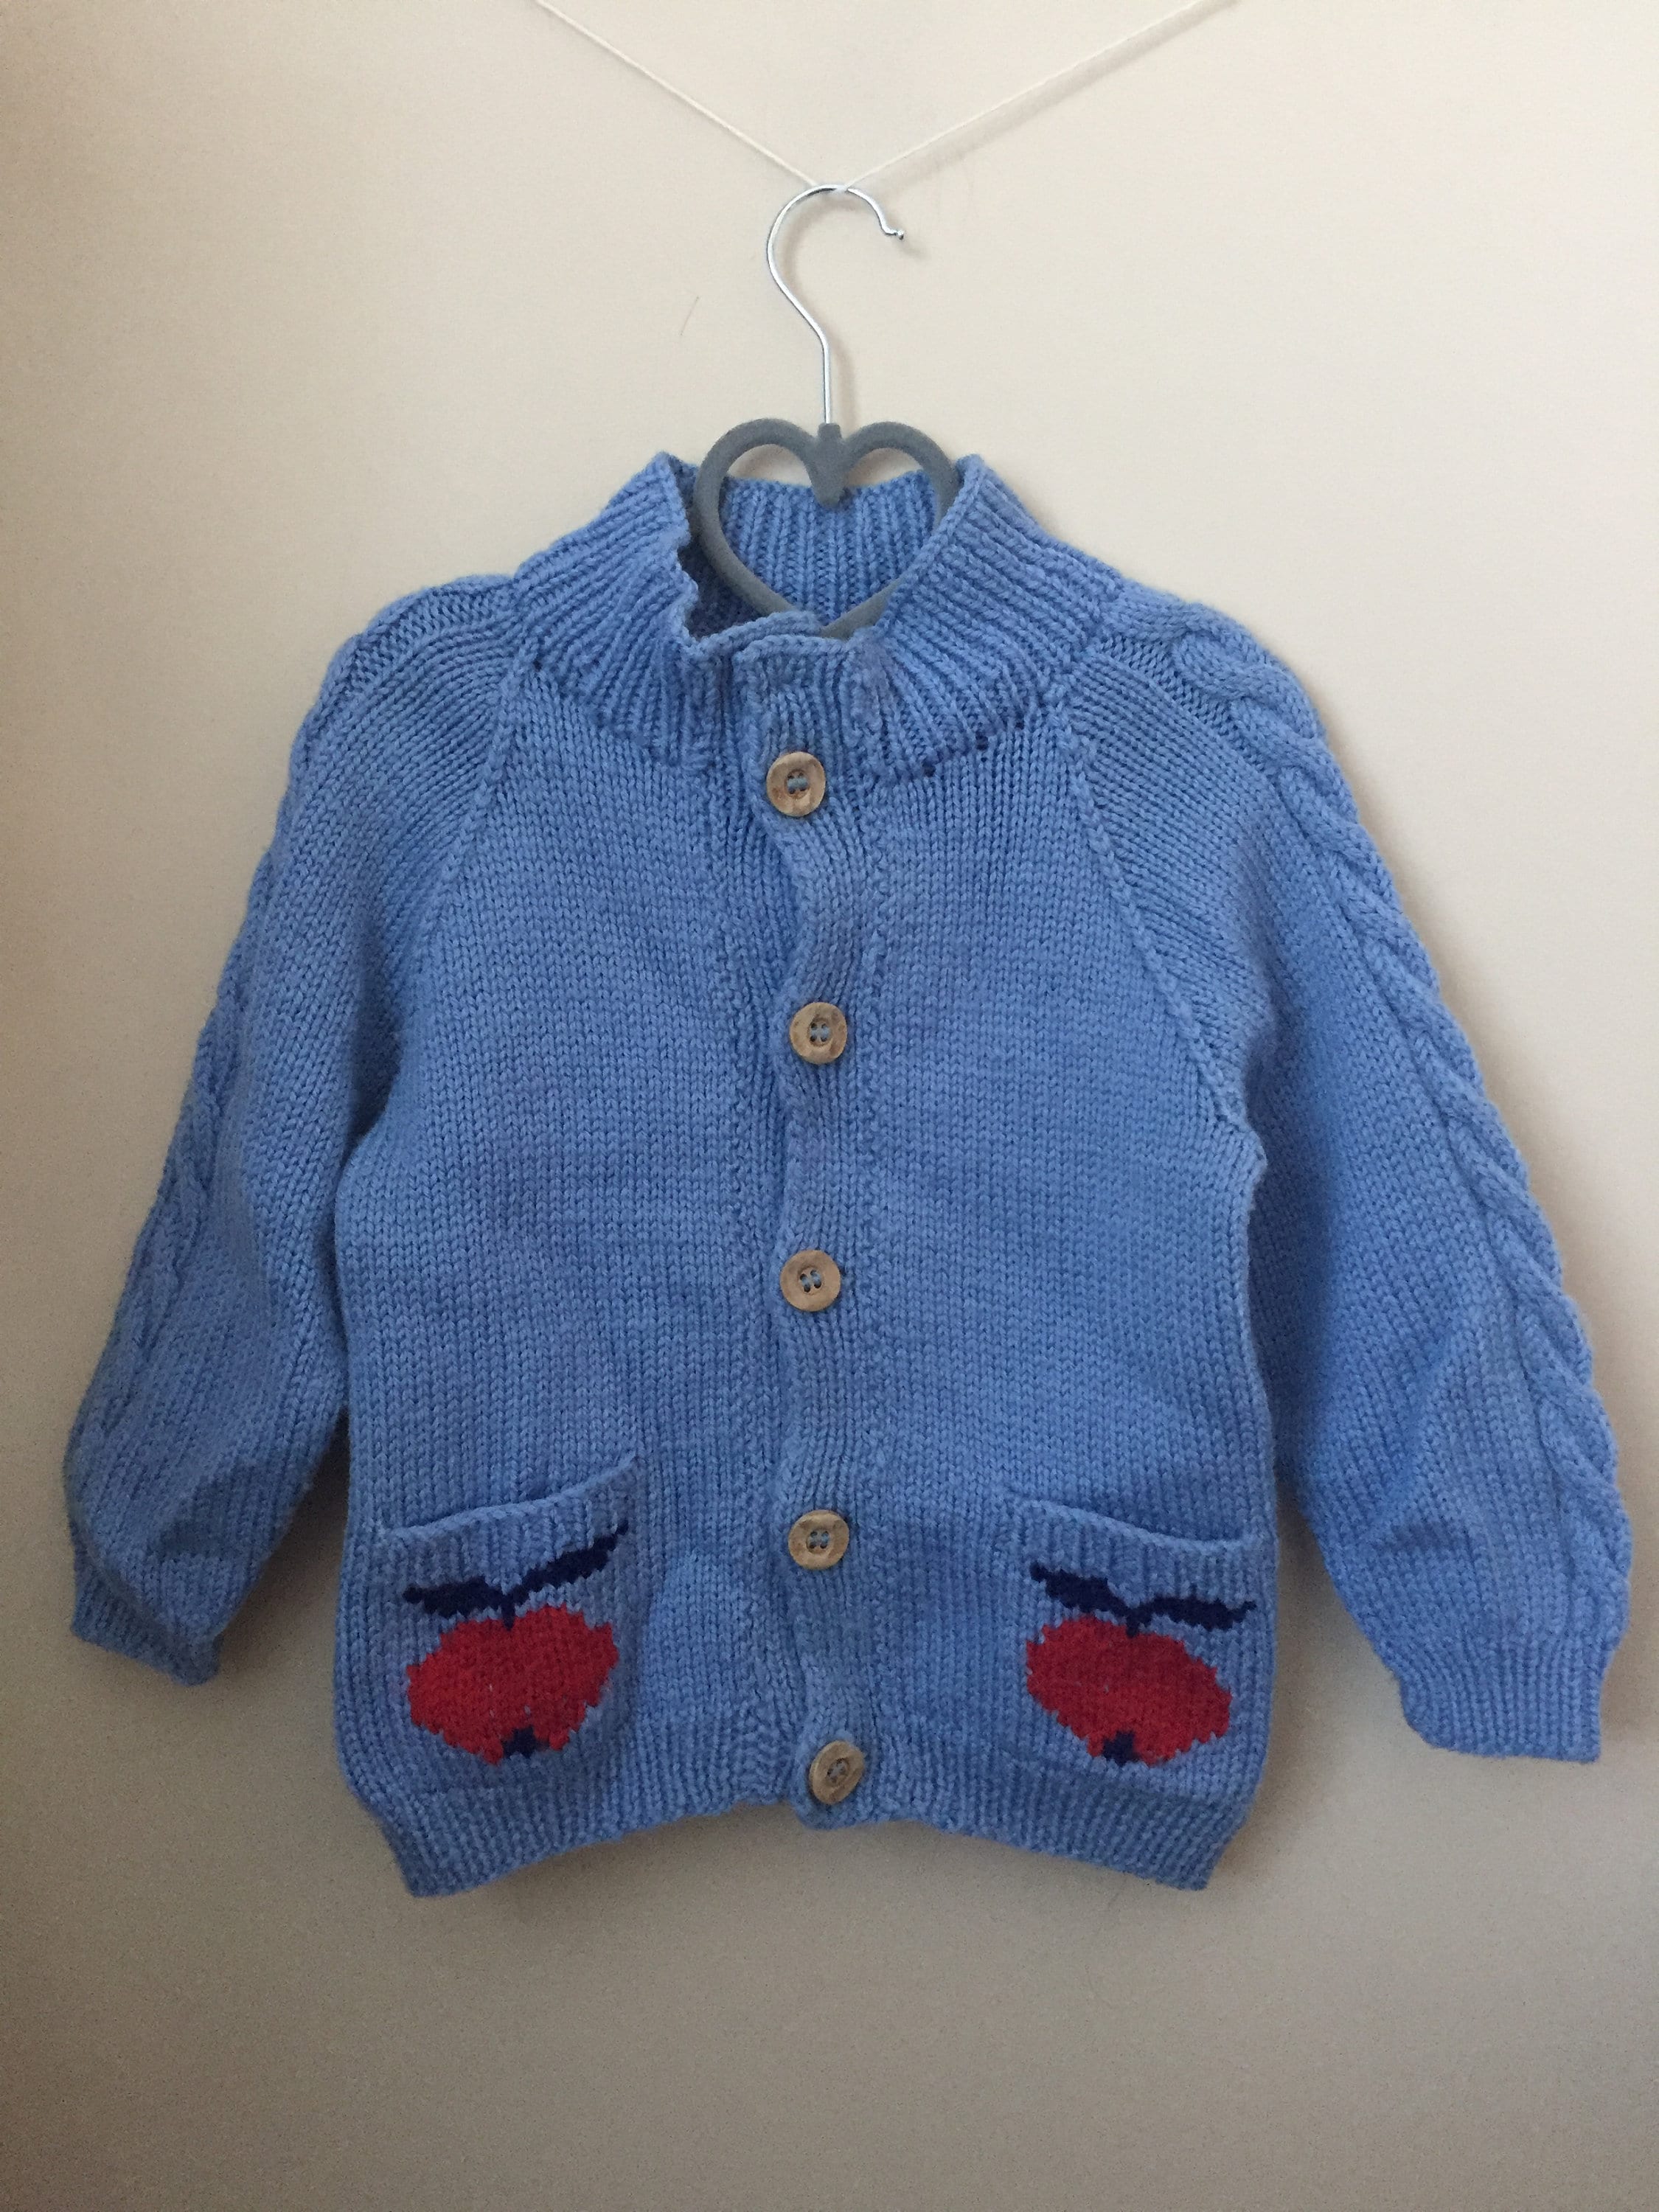 Vintage Hand Knit Cardigan Sweater for Baby With Cabled - Etsy